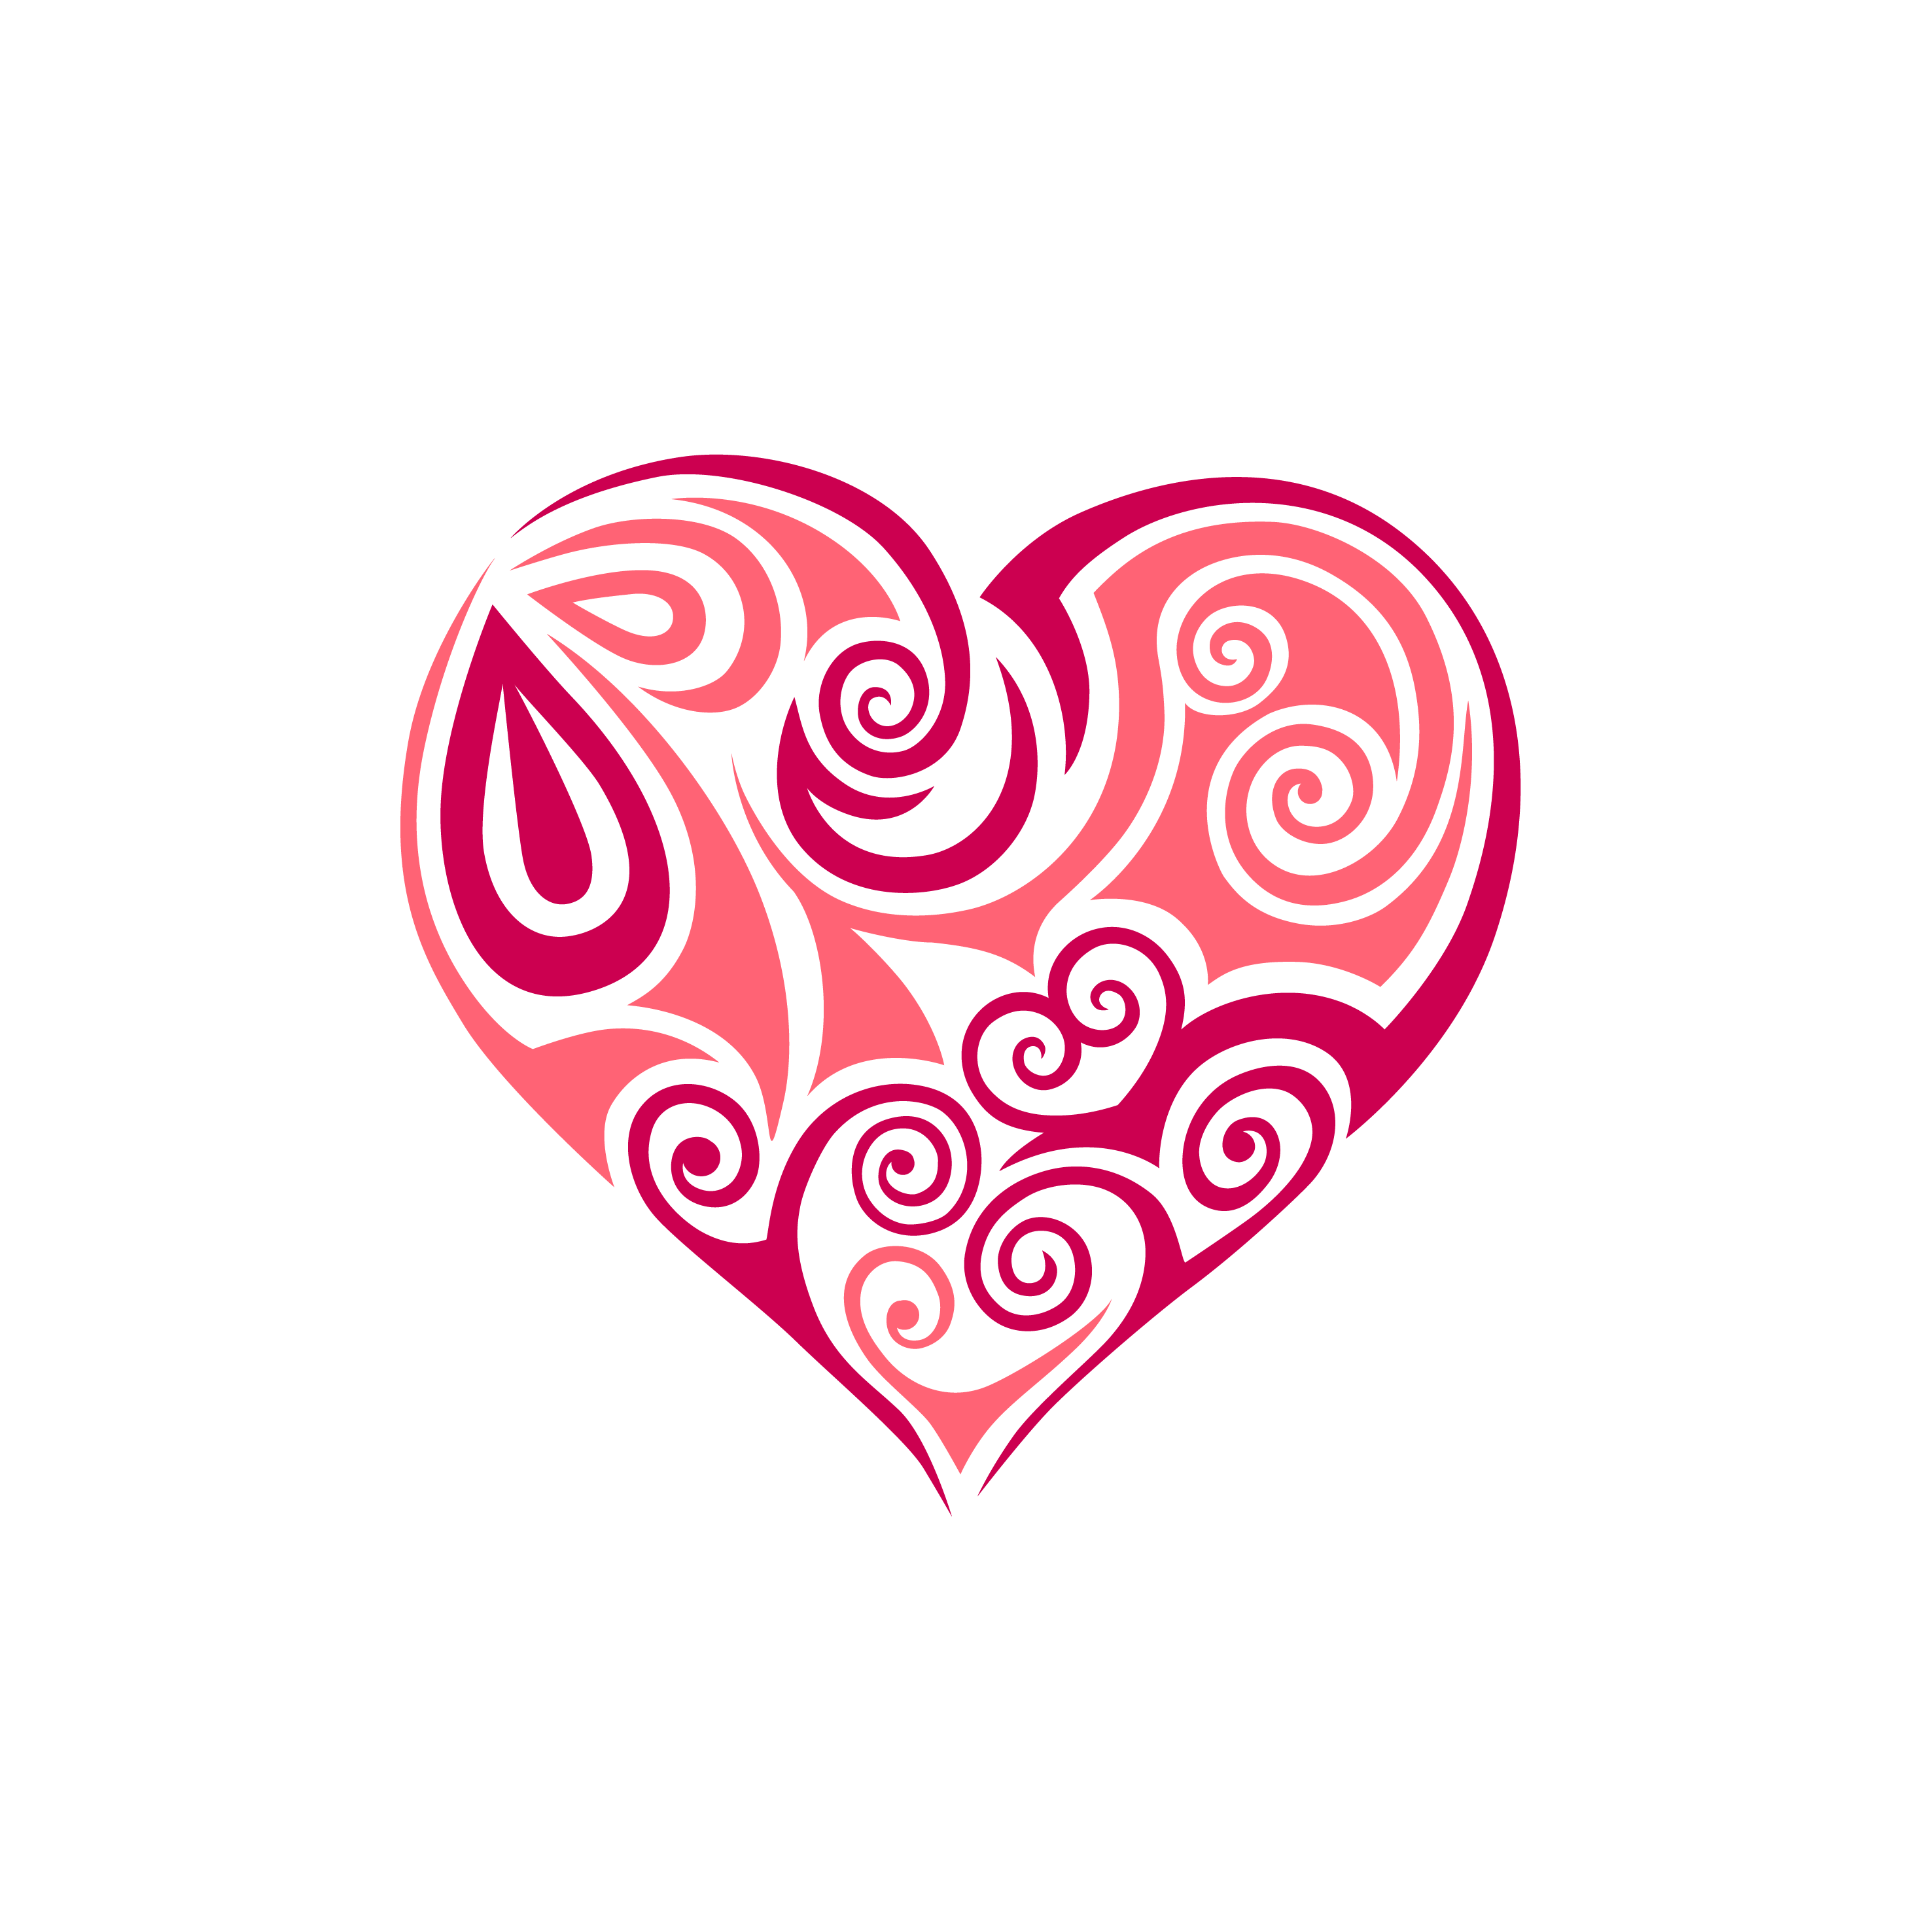 Photo Of Hearts - Clipart library